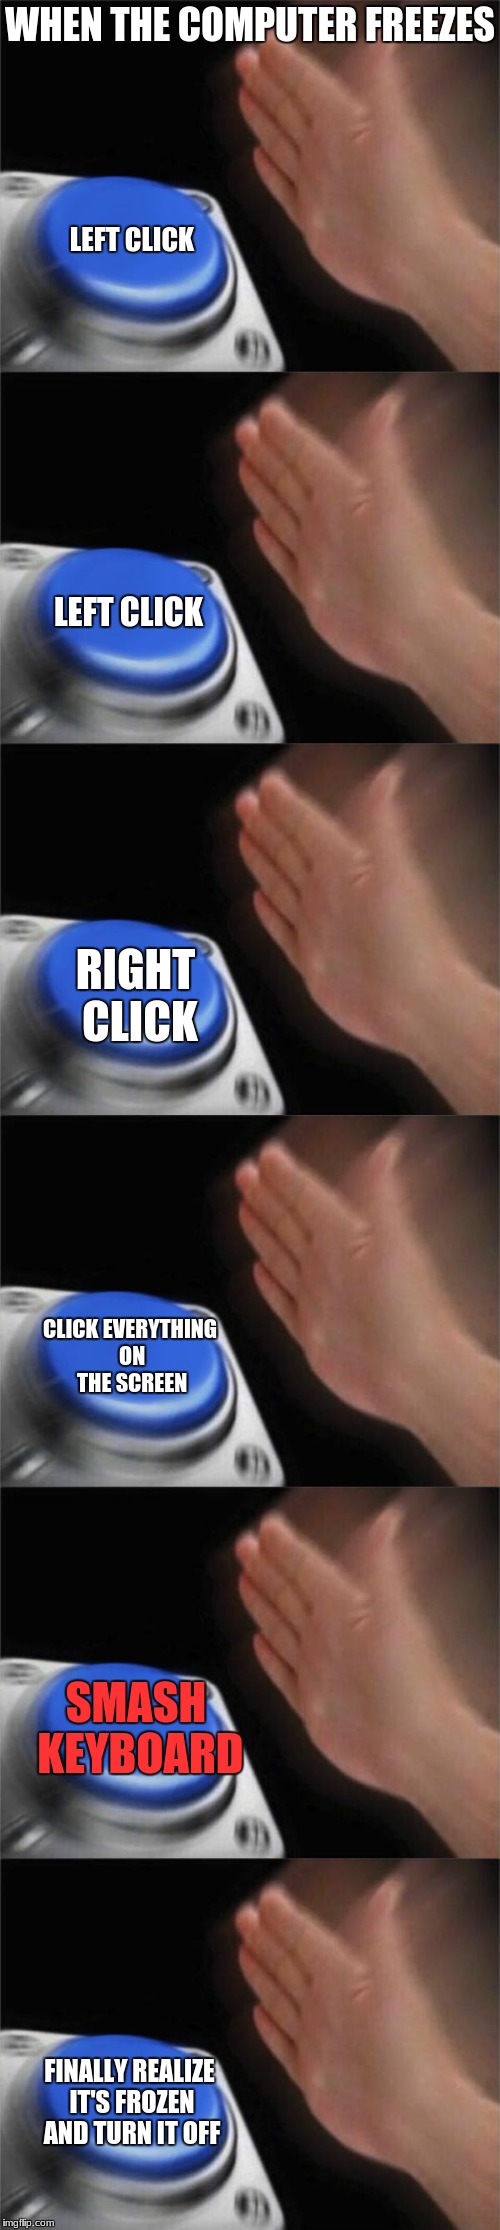 I hate when that happens | WHEN THE COMPUTER FREEZES; LEFT CLICK; LEFT CLICK; RIGHT CLICK; CLICK EVERYTHING ON THE SCREEN; SMASH KEYBOARD; FINALLY REALIZE IT'S FROZEN AND TURN IT OFF | image tagged in blank nut button,computers,freeze,annoying | made w/ Imgflip meme maker